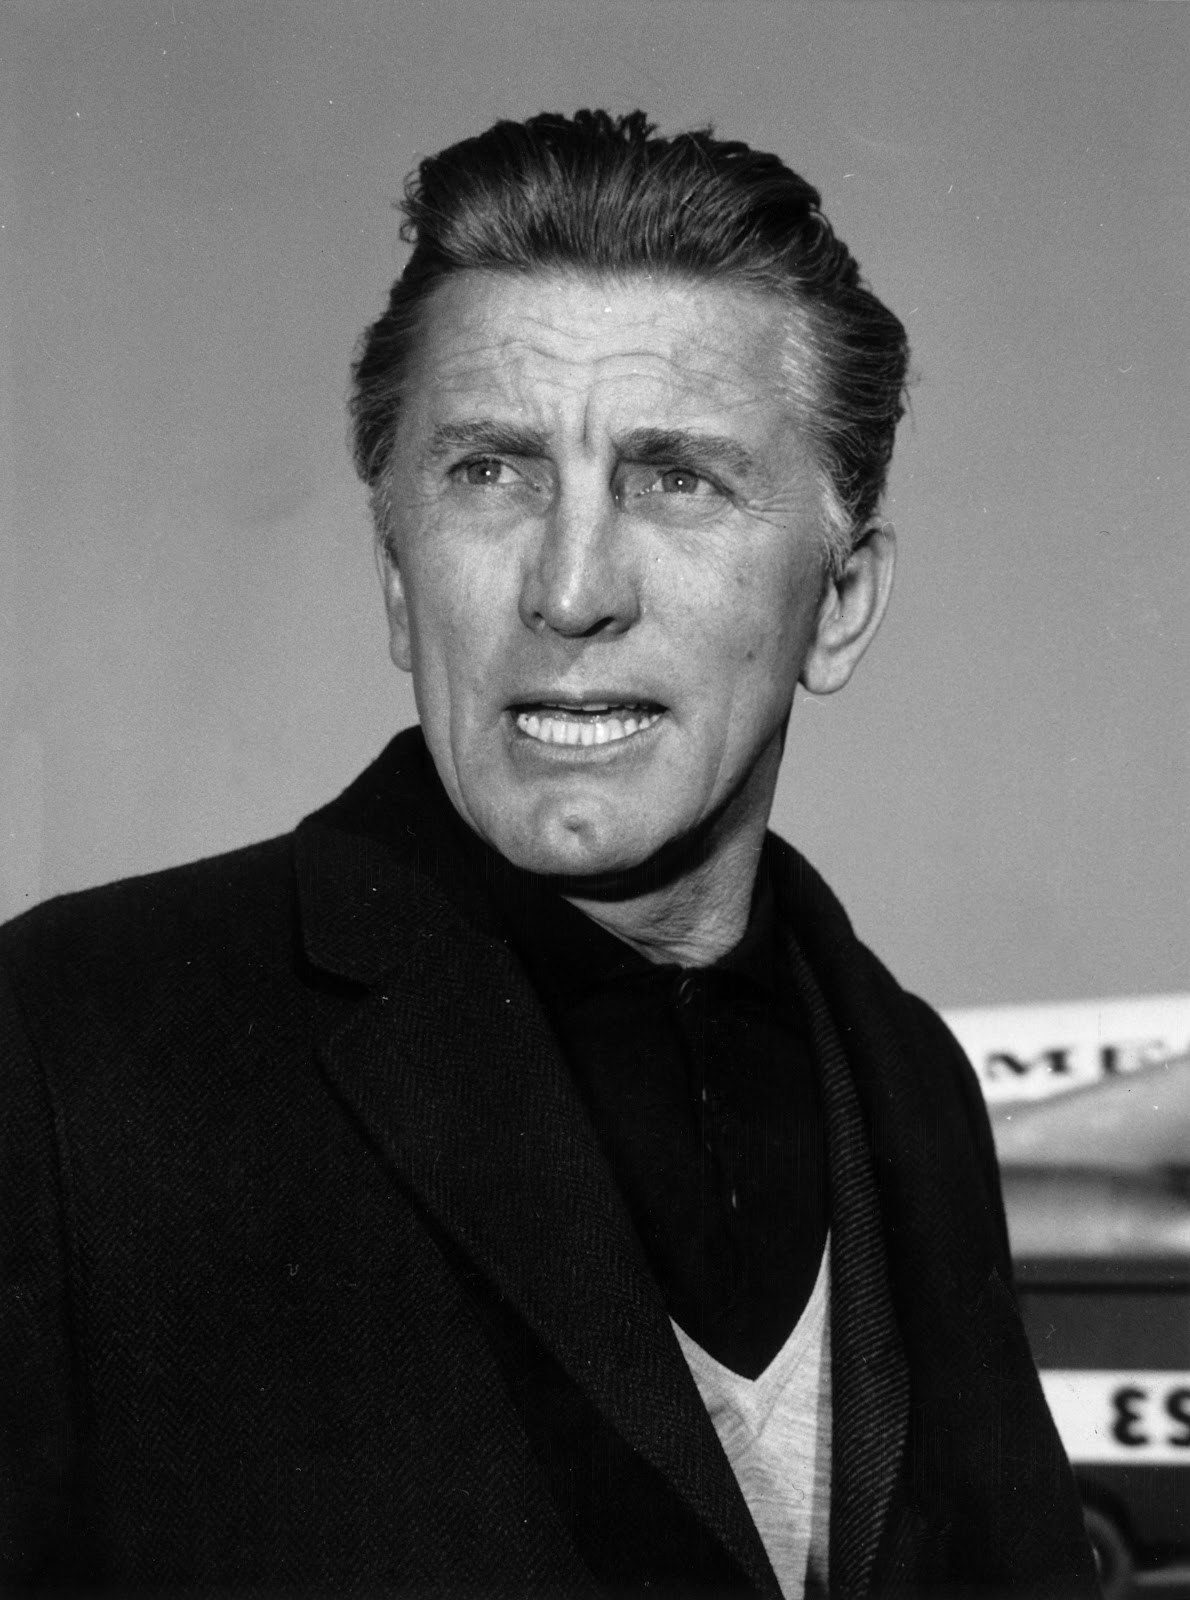 Kirk Douglas in Rom 1962. | Quelle: Getty Images